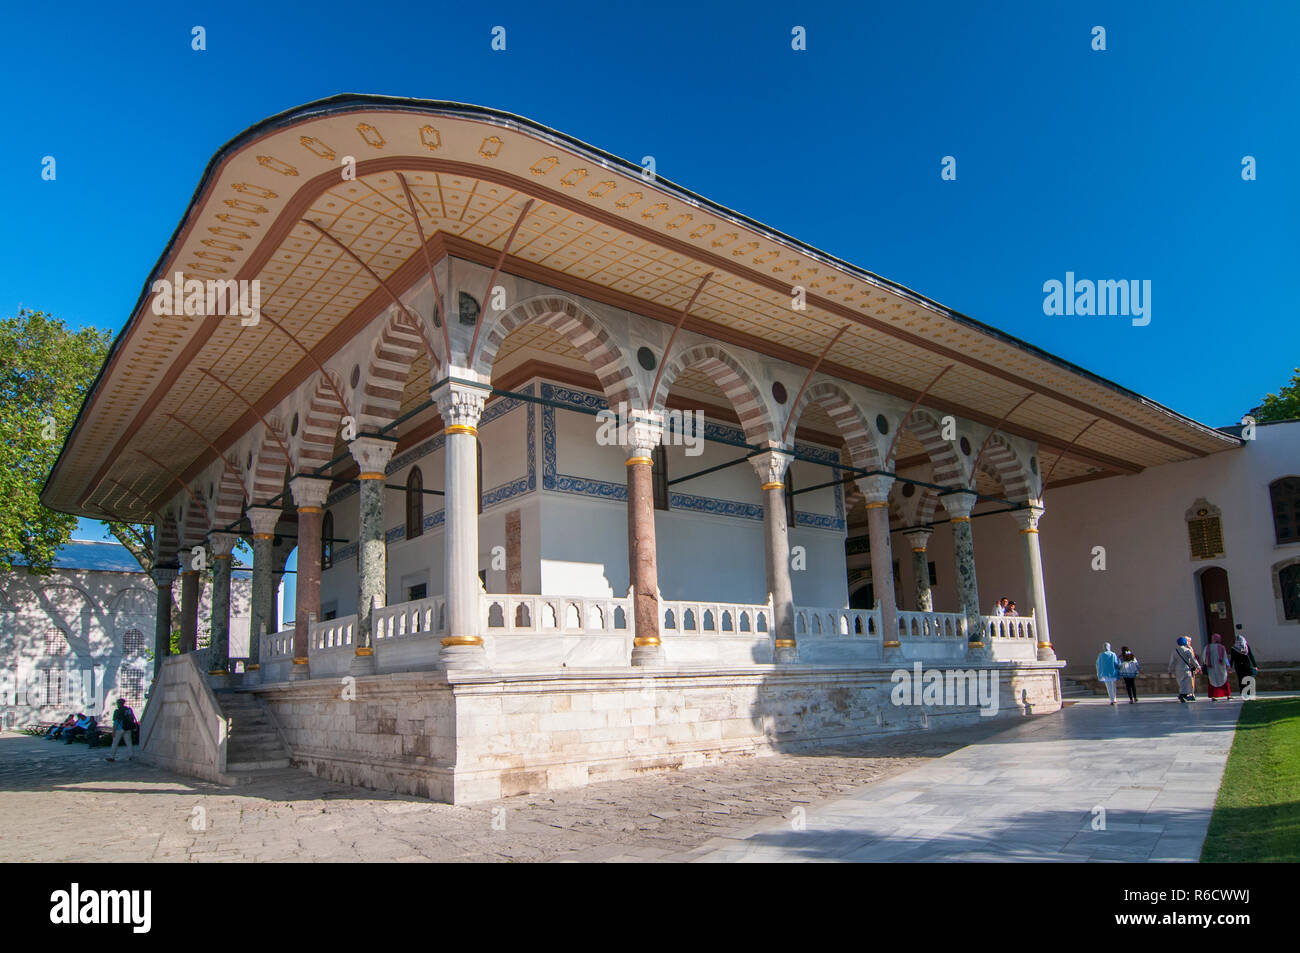 The Audience Chamber (Audience Hall Or Chamber Of Petitions) In The Third Courtyard Of Topkapi Palace, Istanbul, Turkey Stock Photo